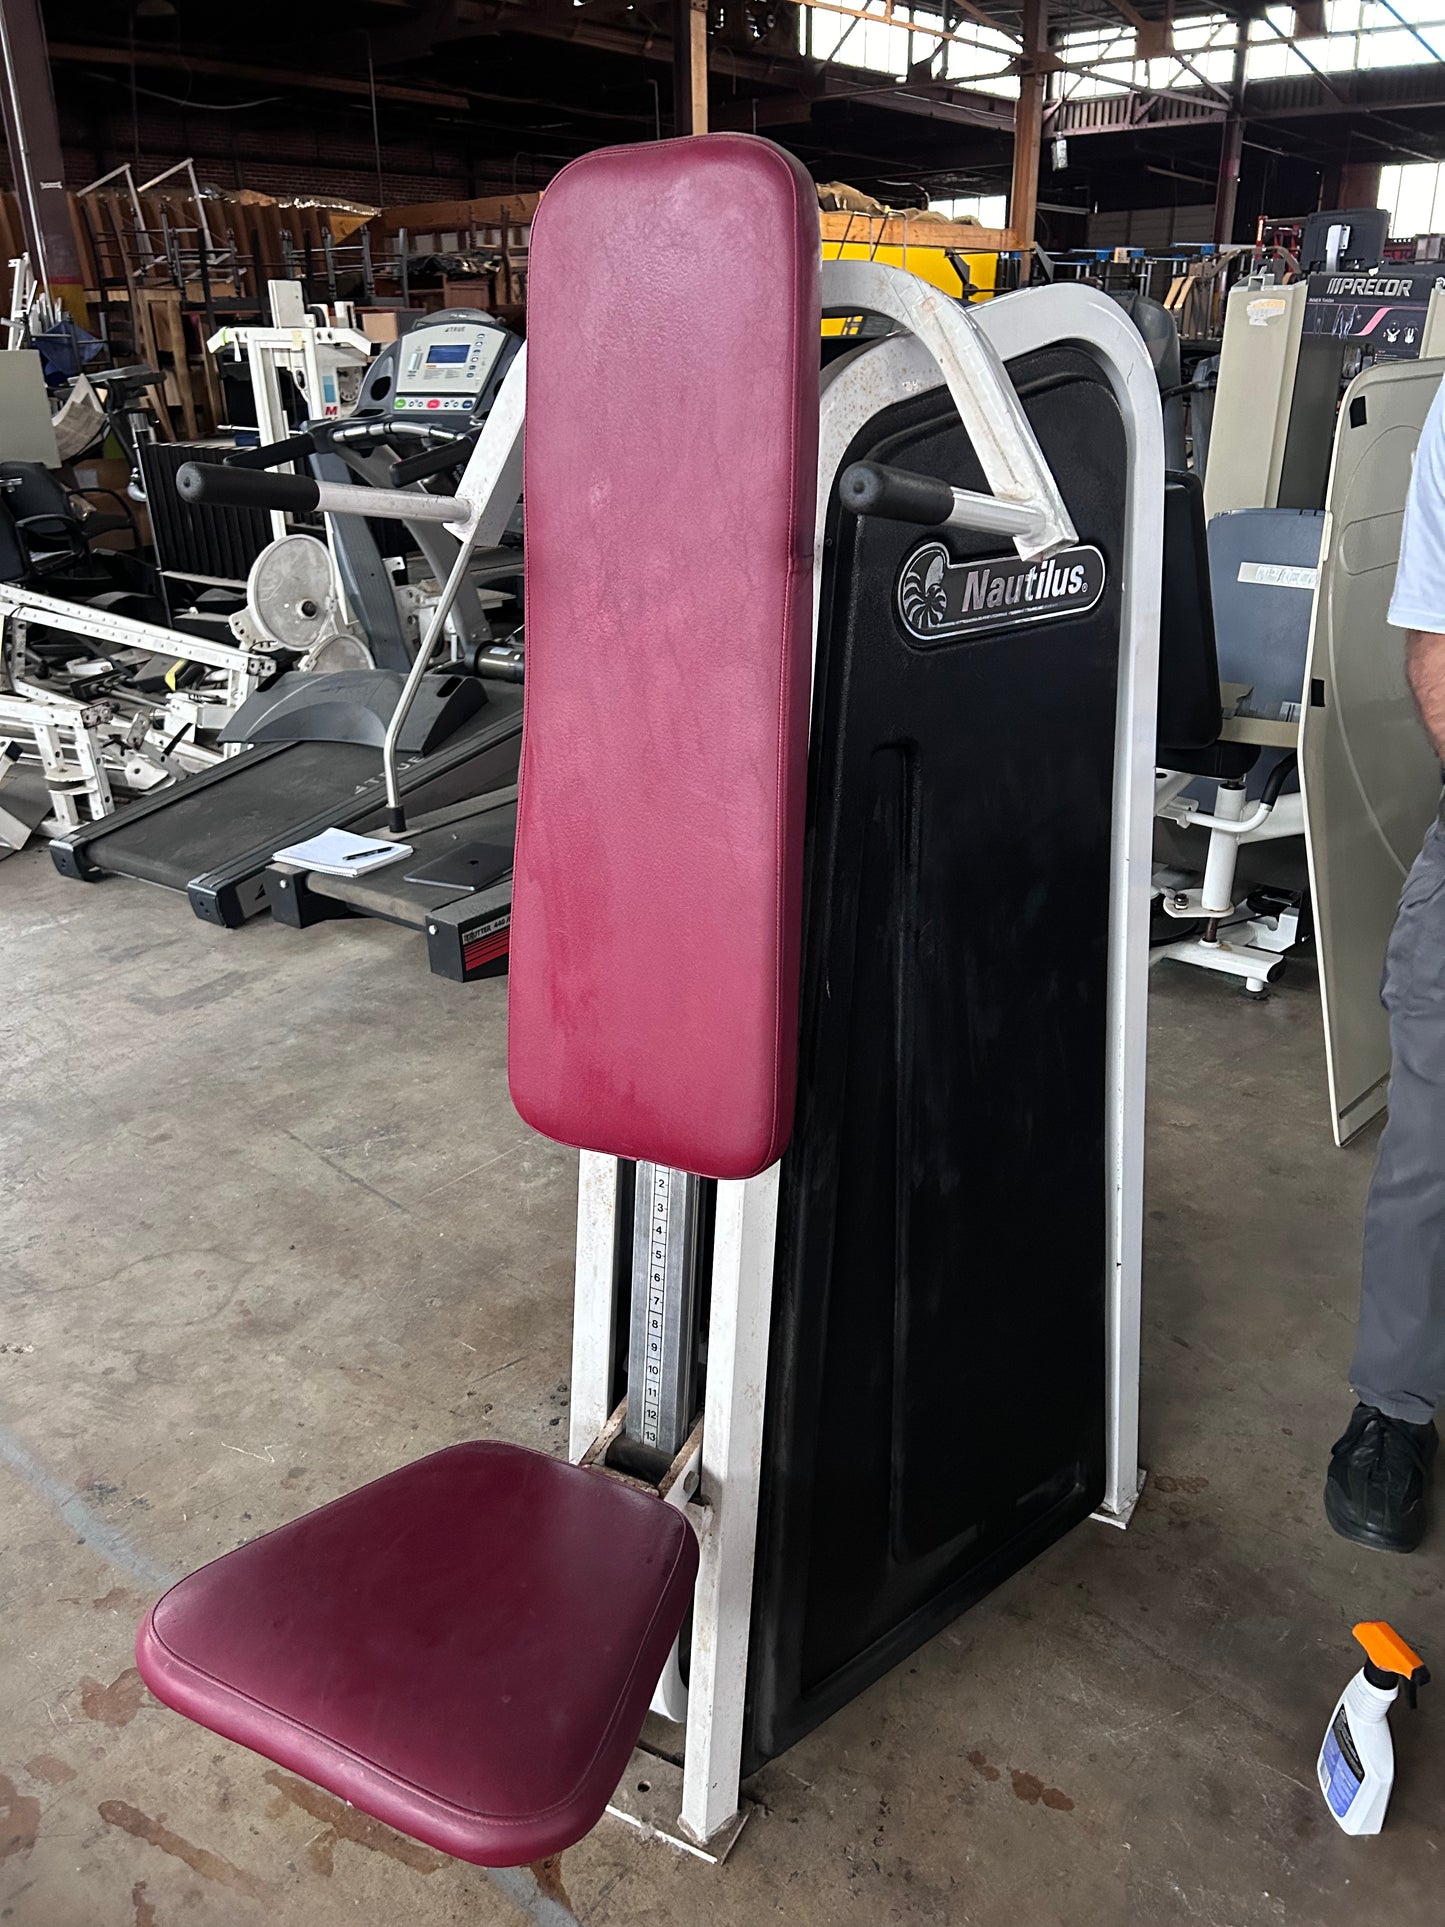 Pre-Owned Nautilus First Generation Selectorized Overhead Press - ExerciseUnlimited